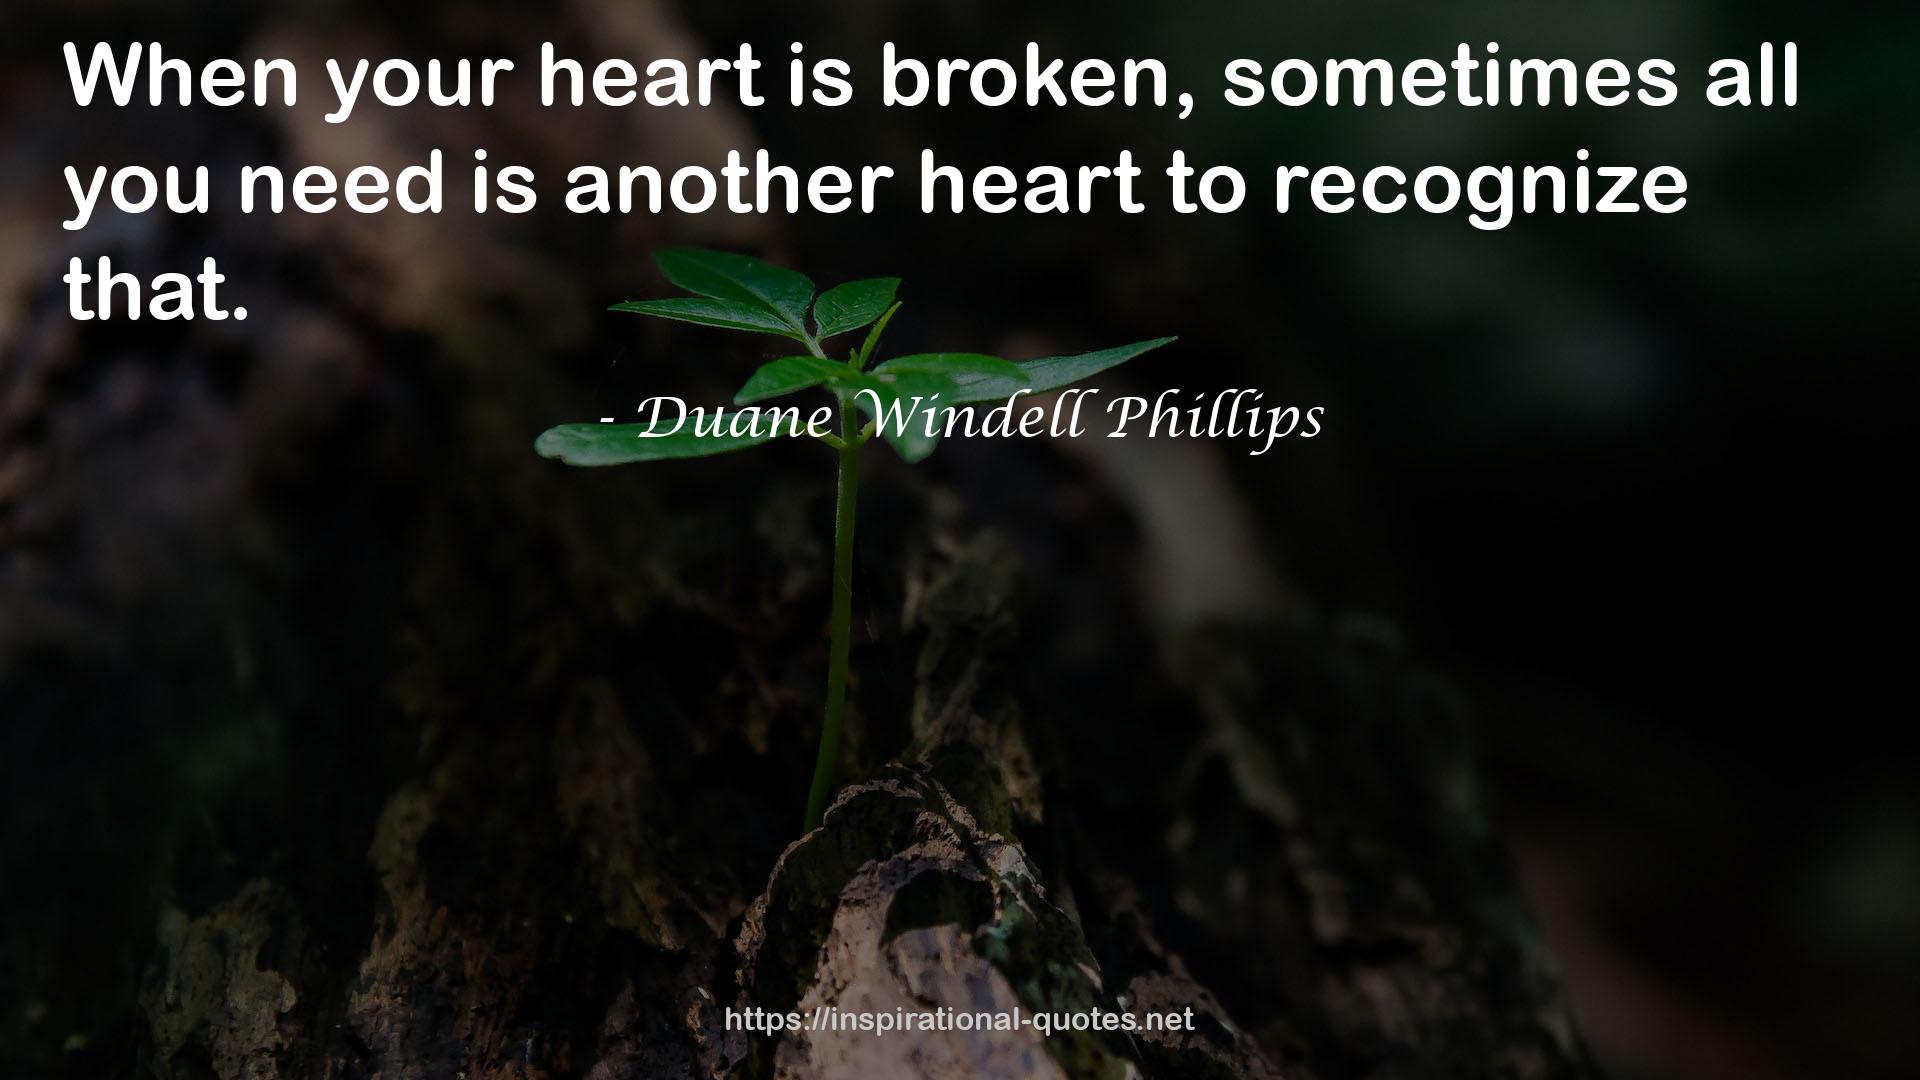 Duane Windell Phillips QUOTES